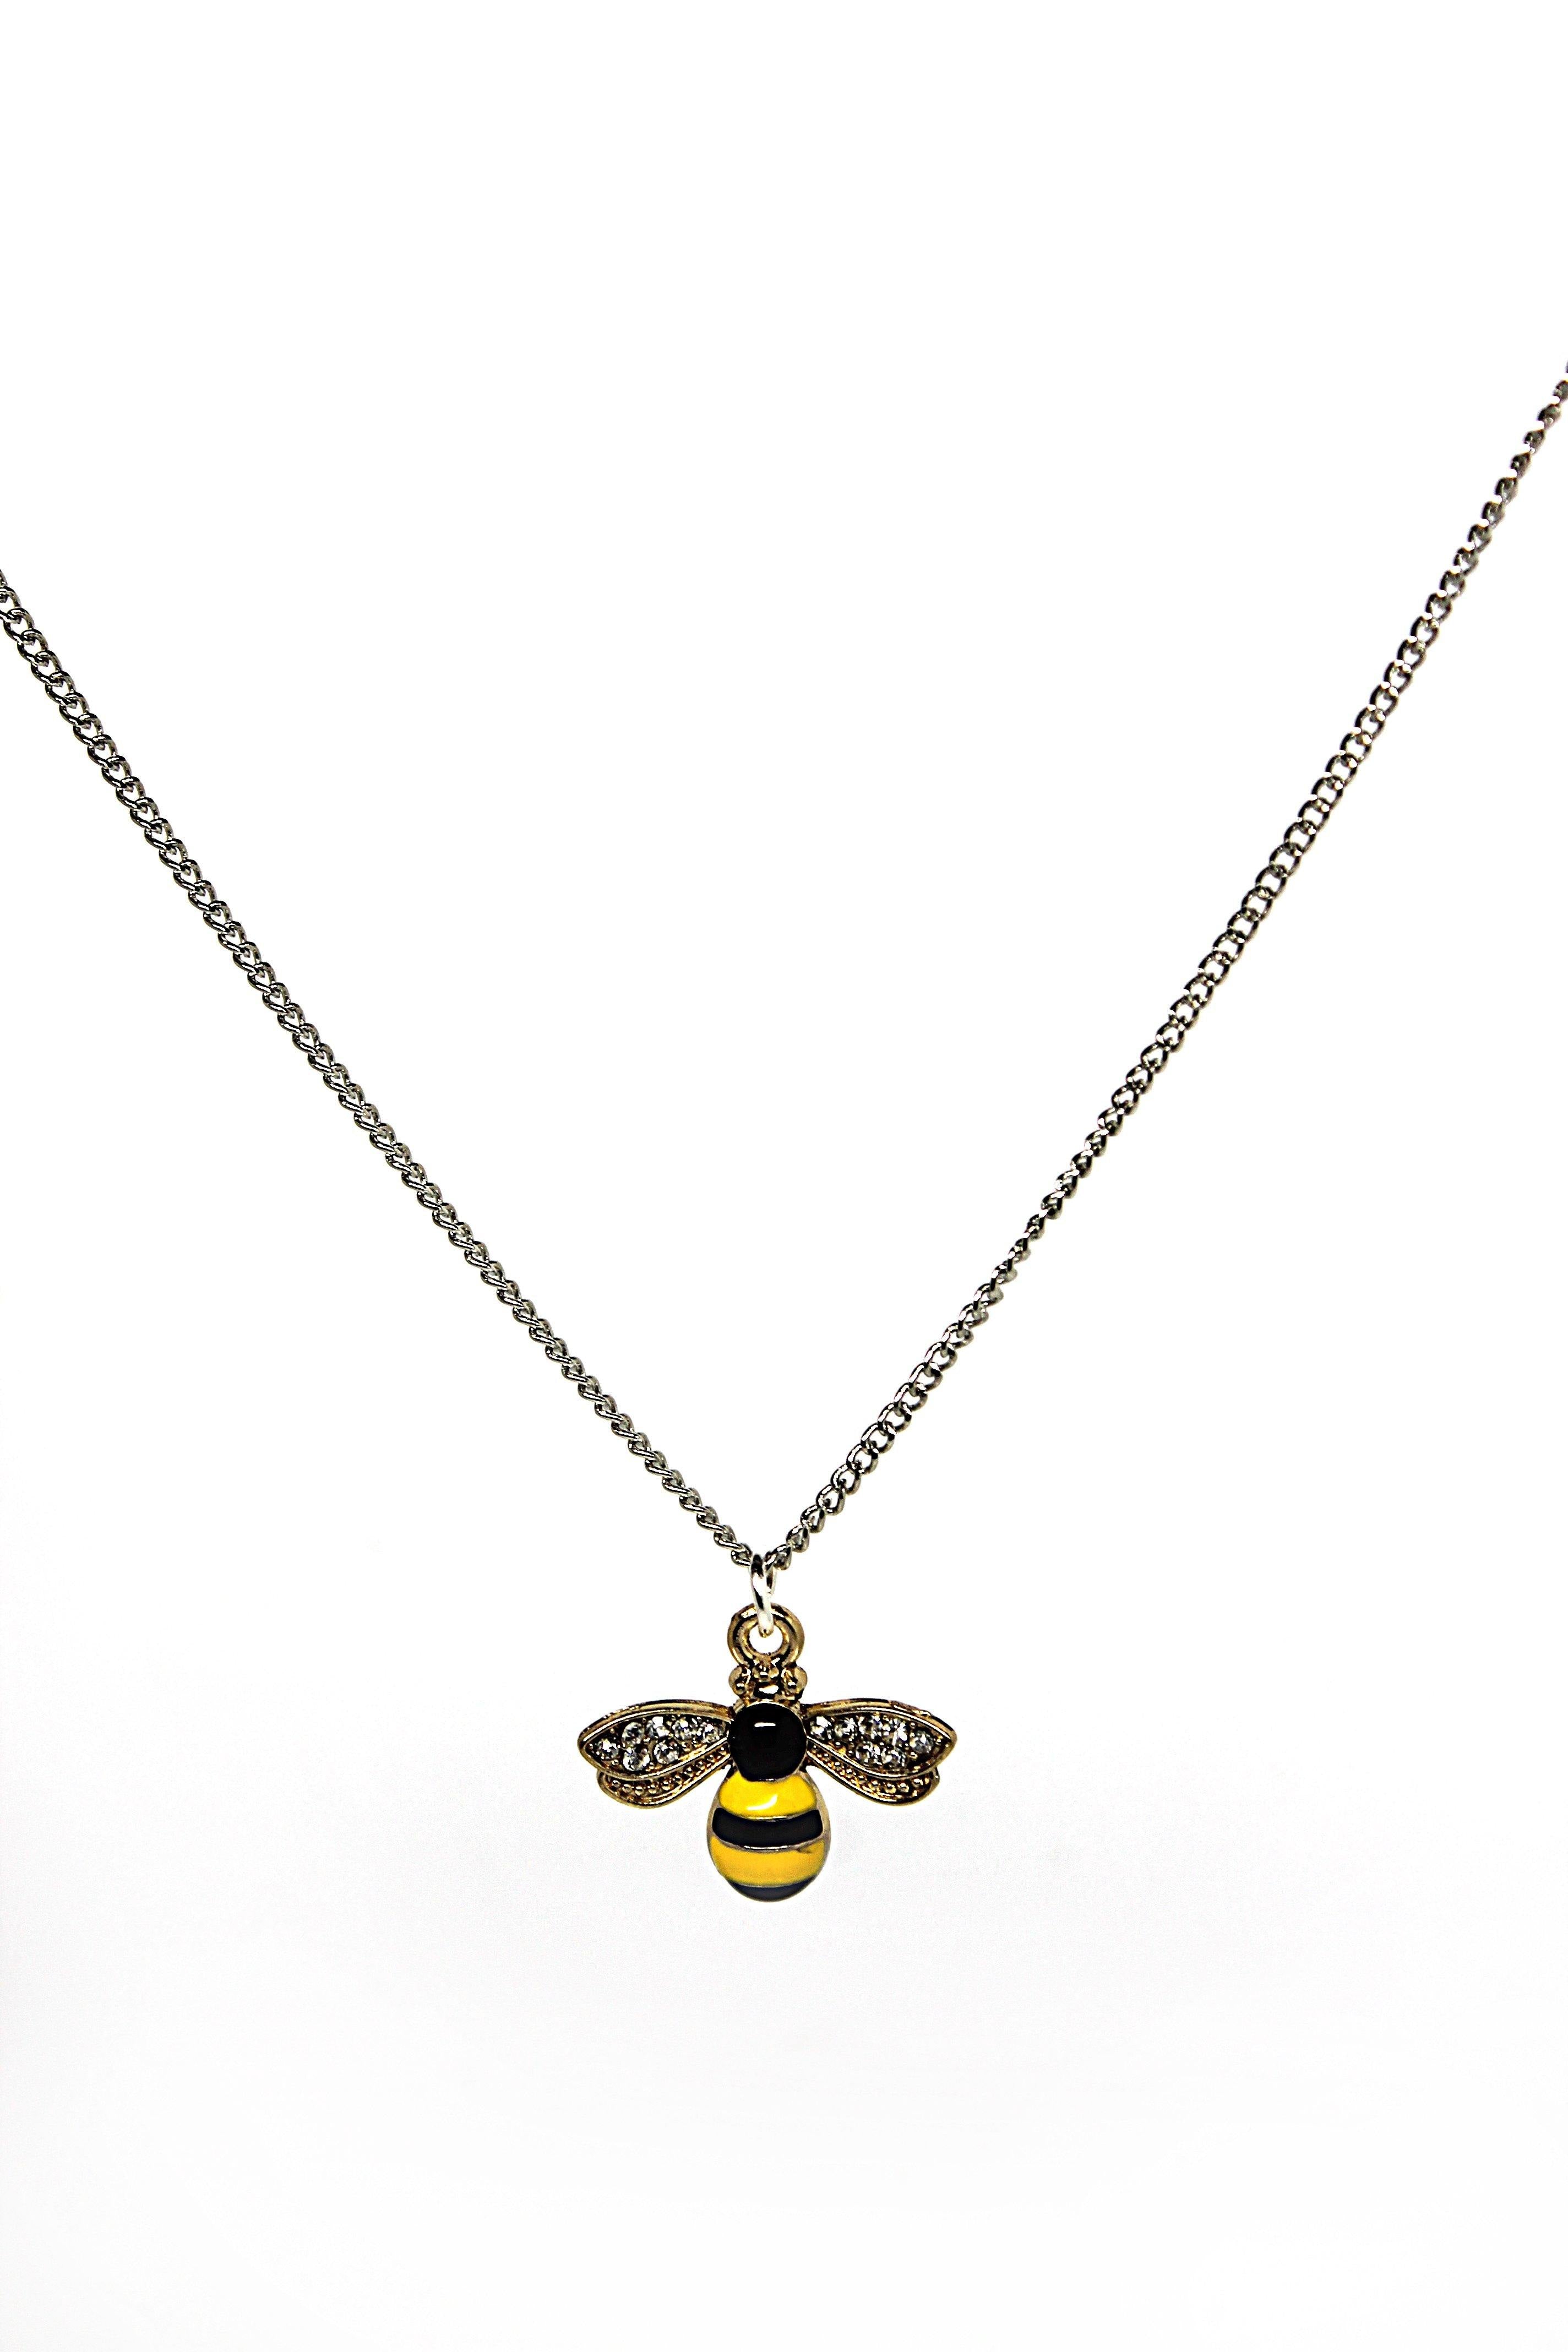 Bee Necklace - Wildtouch - Wildtouch